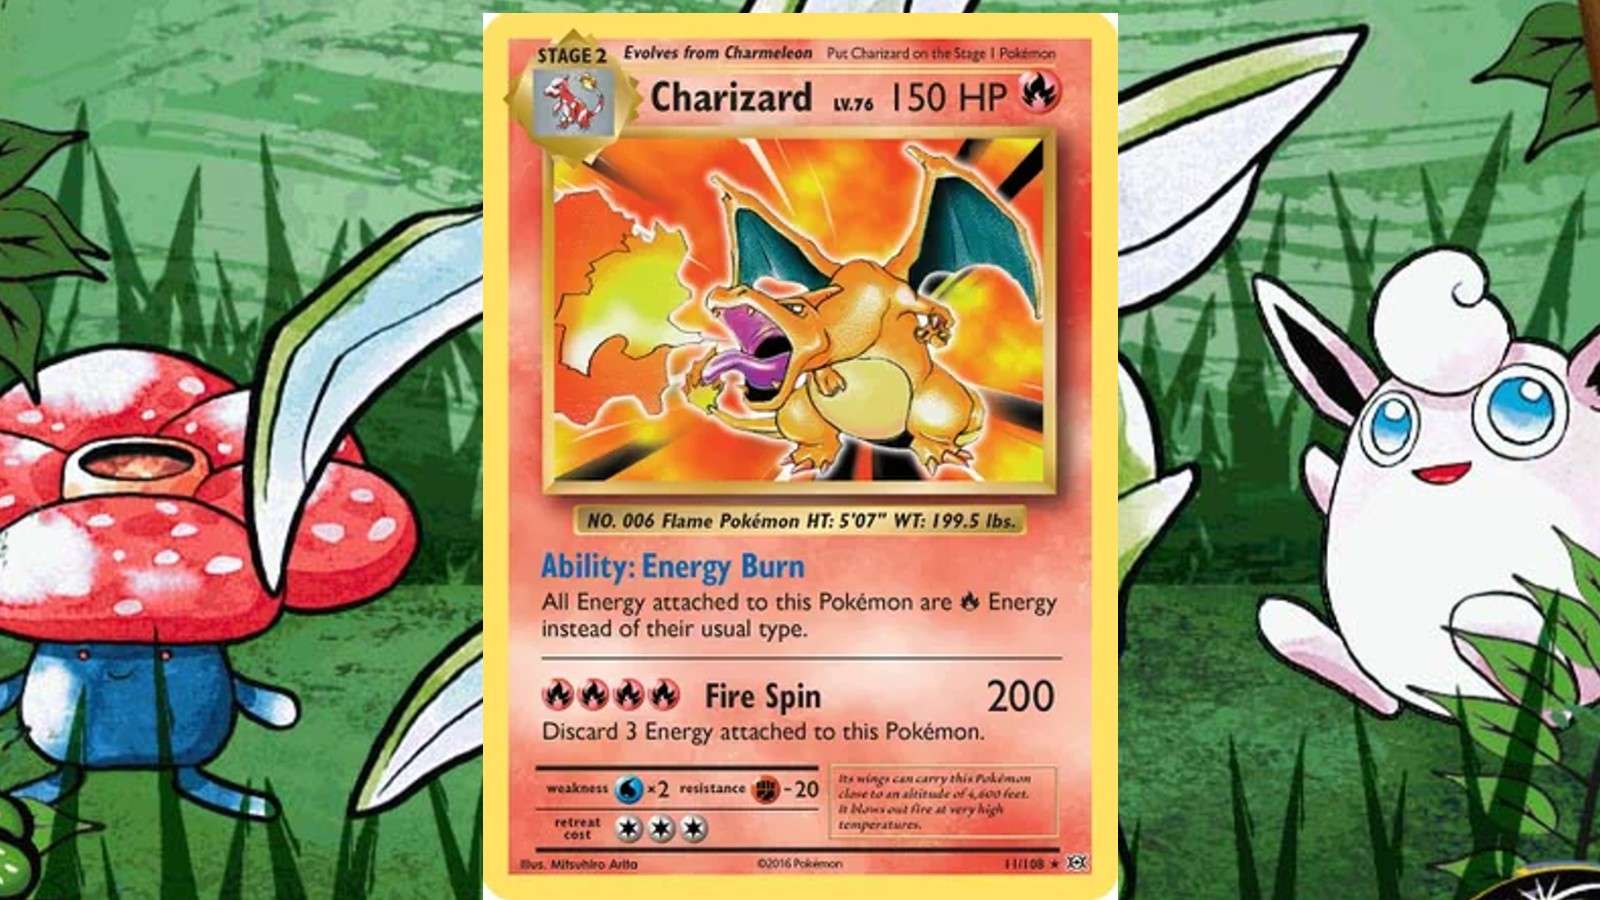 15 Best Places To Sell Pokemon Cards: How To Sell Pokemon Cards